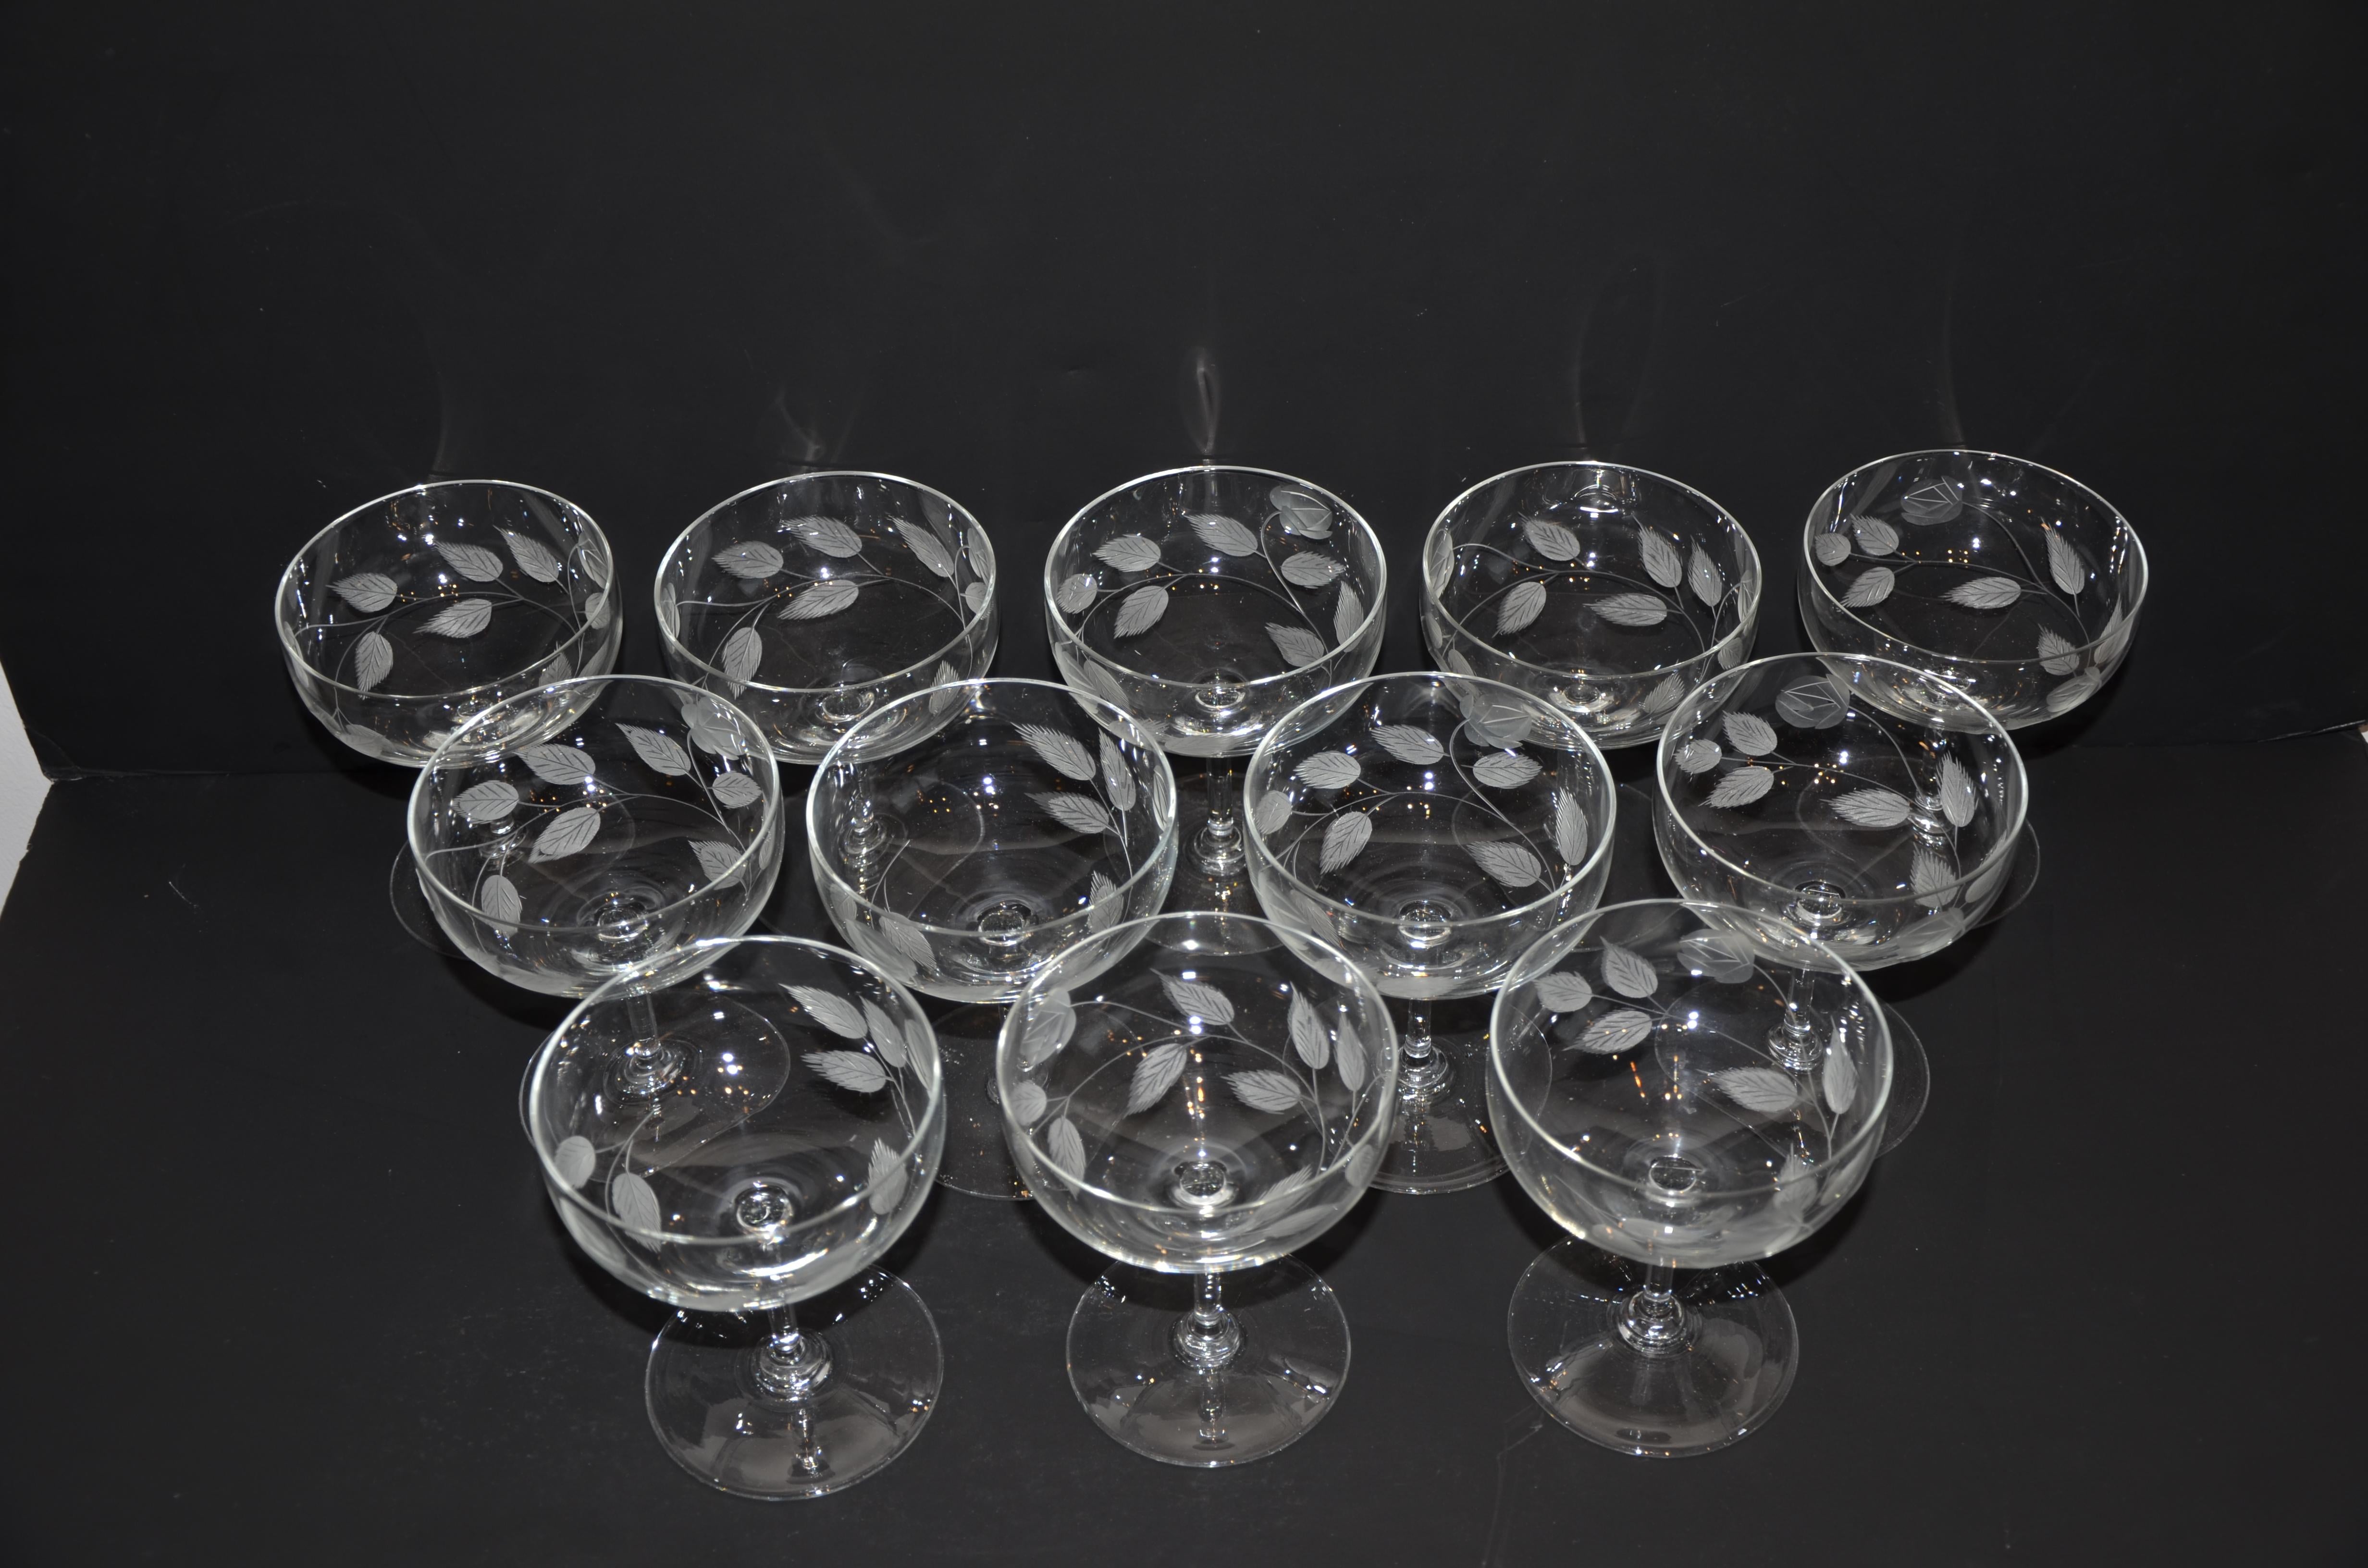 Set of 12 Cut Glass Rose Stem and Leaf Theme Champagne Coupes Glasses 2